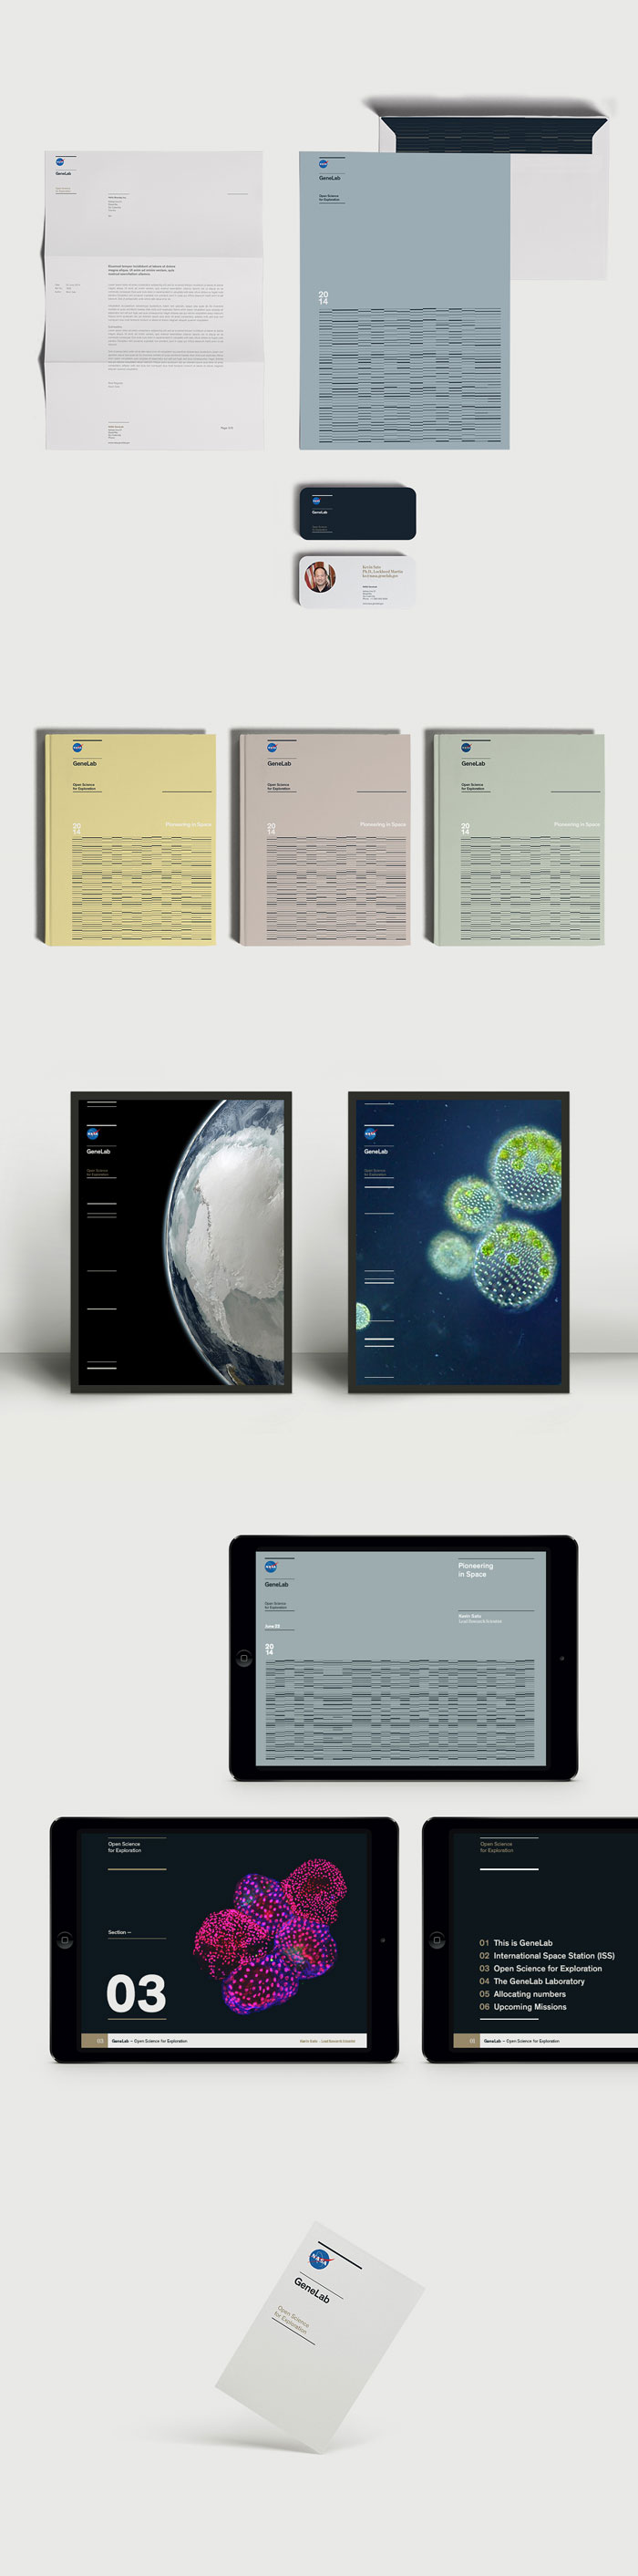 Nasa GeneLab - stationery, communication design, and visual identity for print and web.